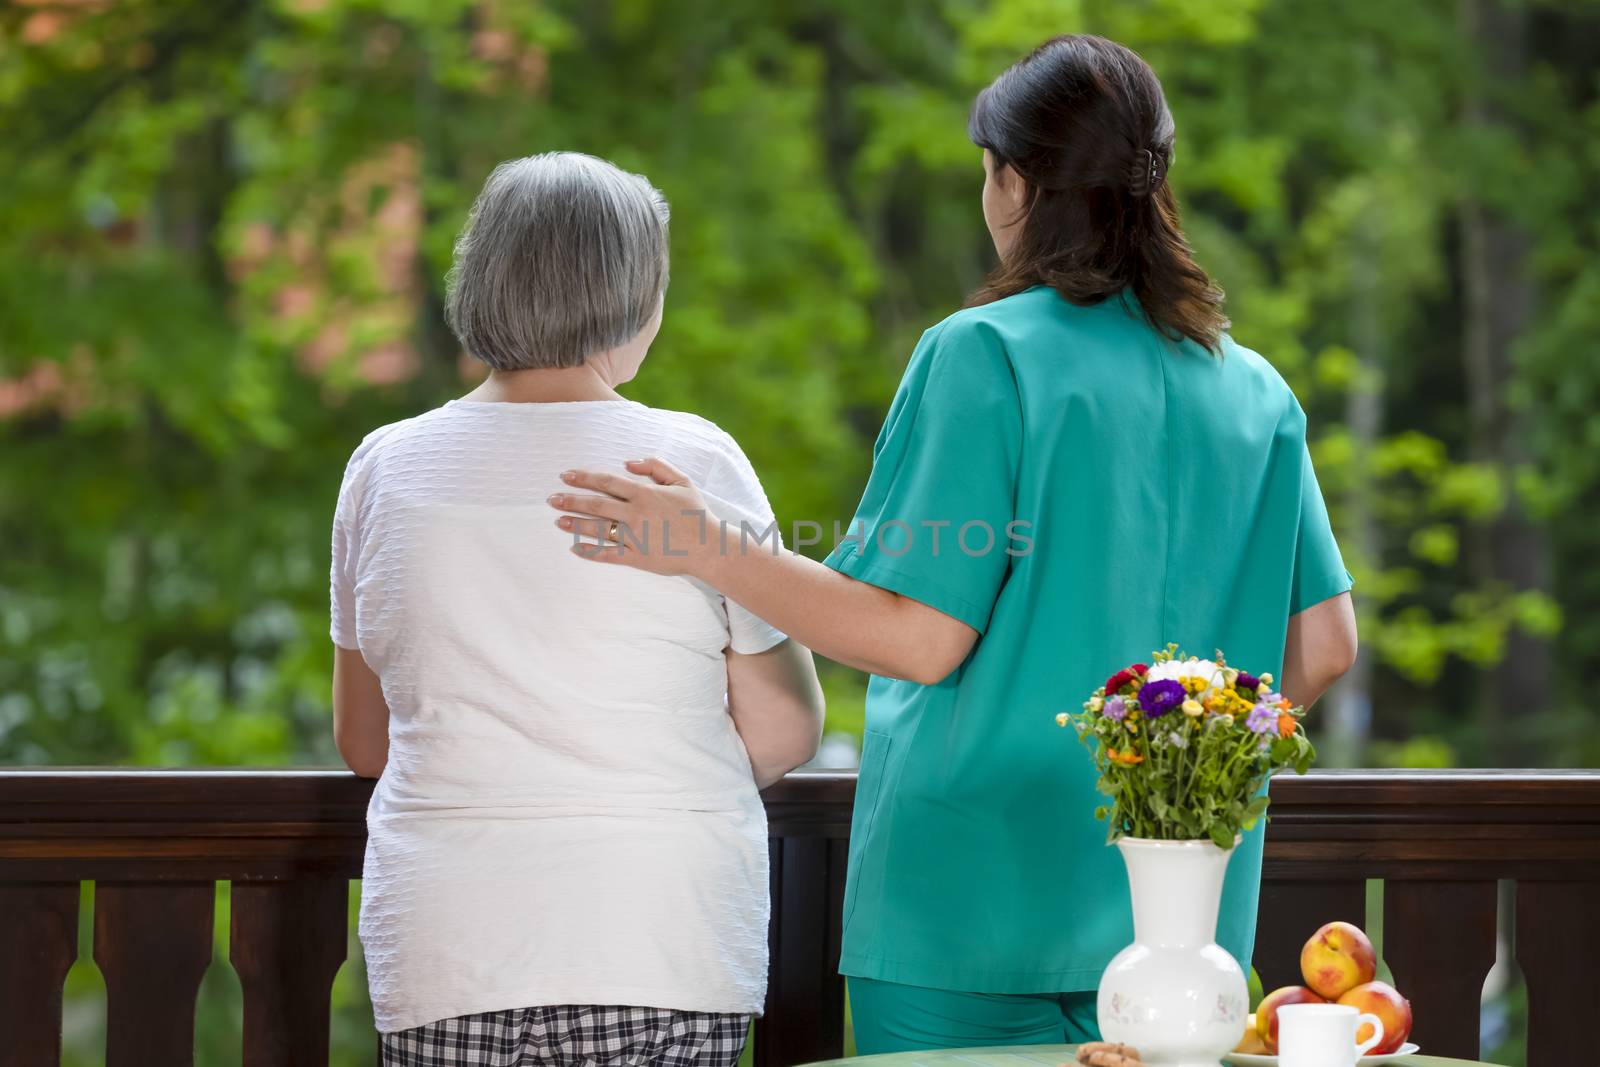 Care worker spending time with senior woman in nursing home care by manaemedia